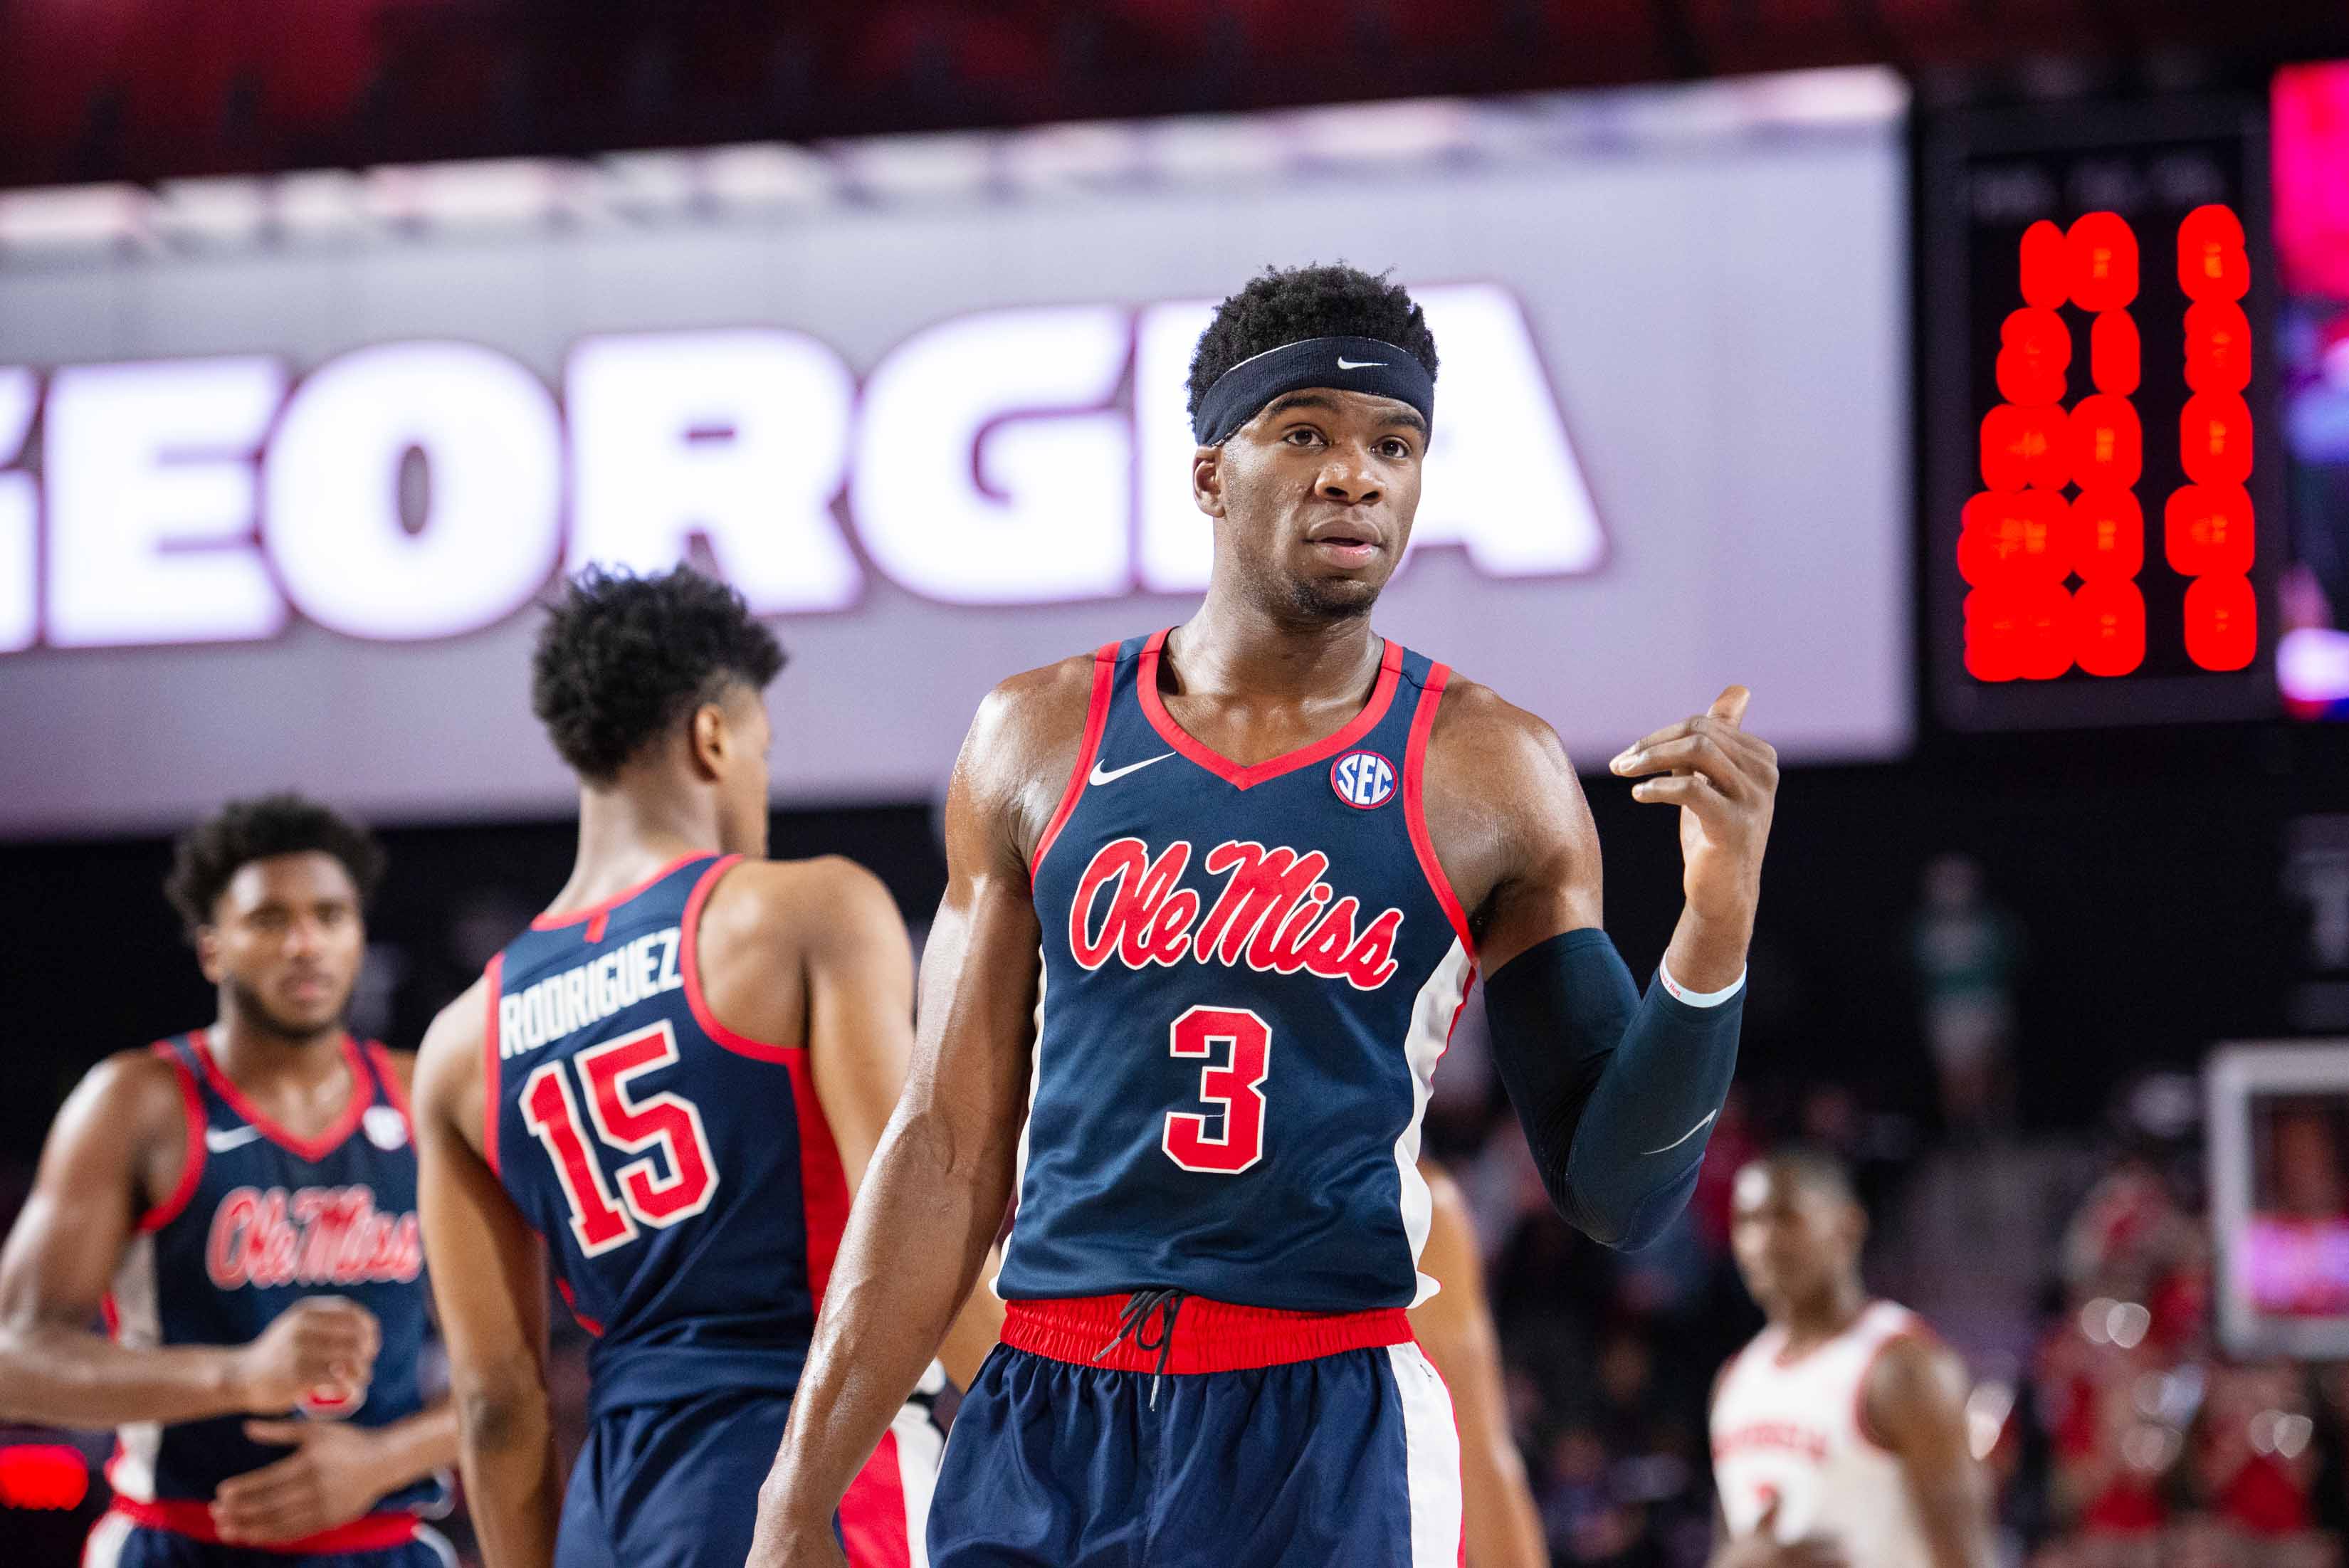 Ole Miss' Terence Davis ready for any NBA role